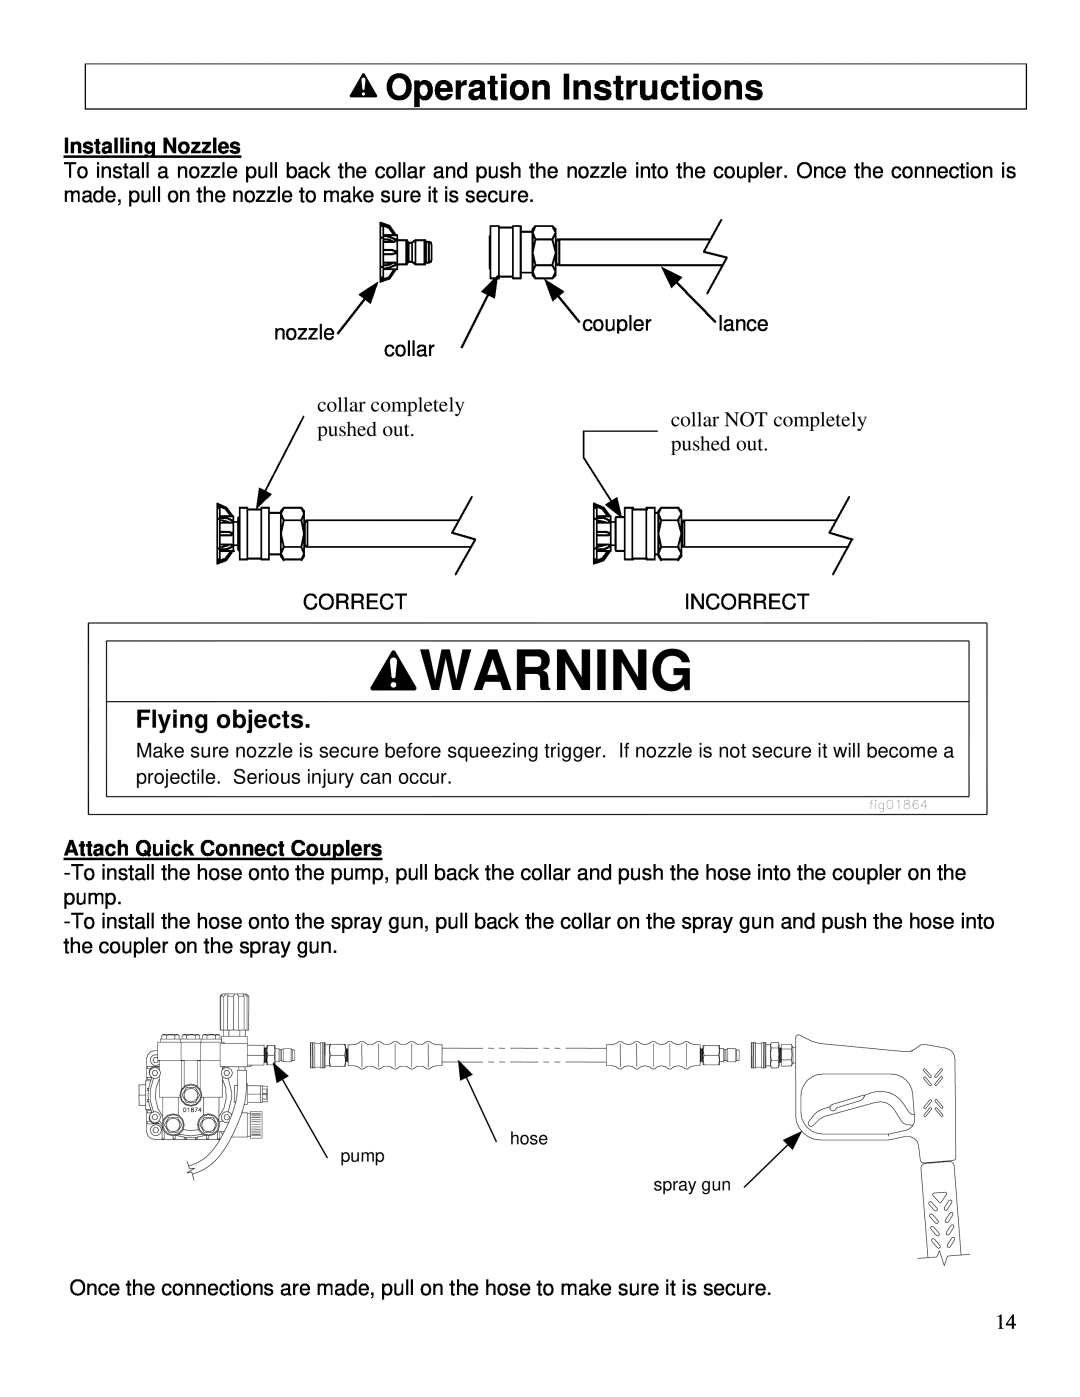 North Star M157300E owner manual Operation Instructions, Flying objects, Installing Nozzles, Attach Quick Connect Couplers 